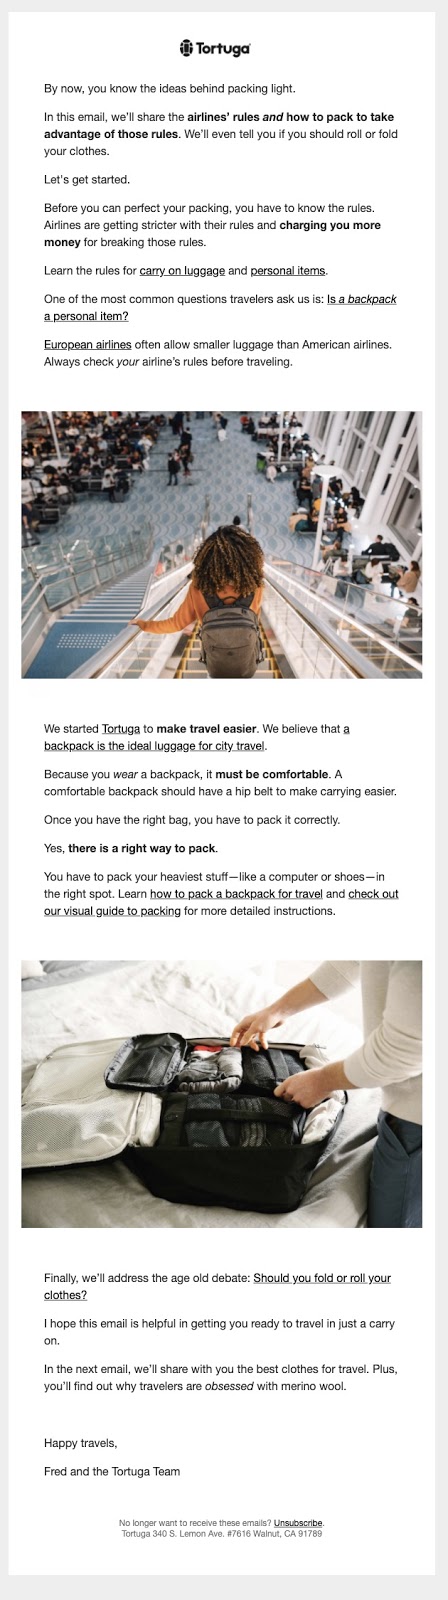 newsletter email example